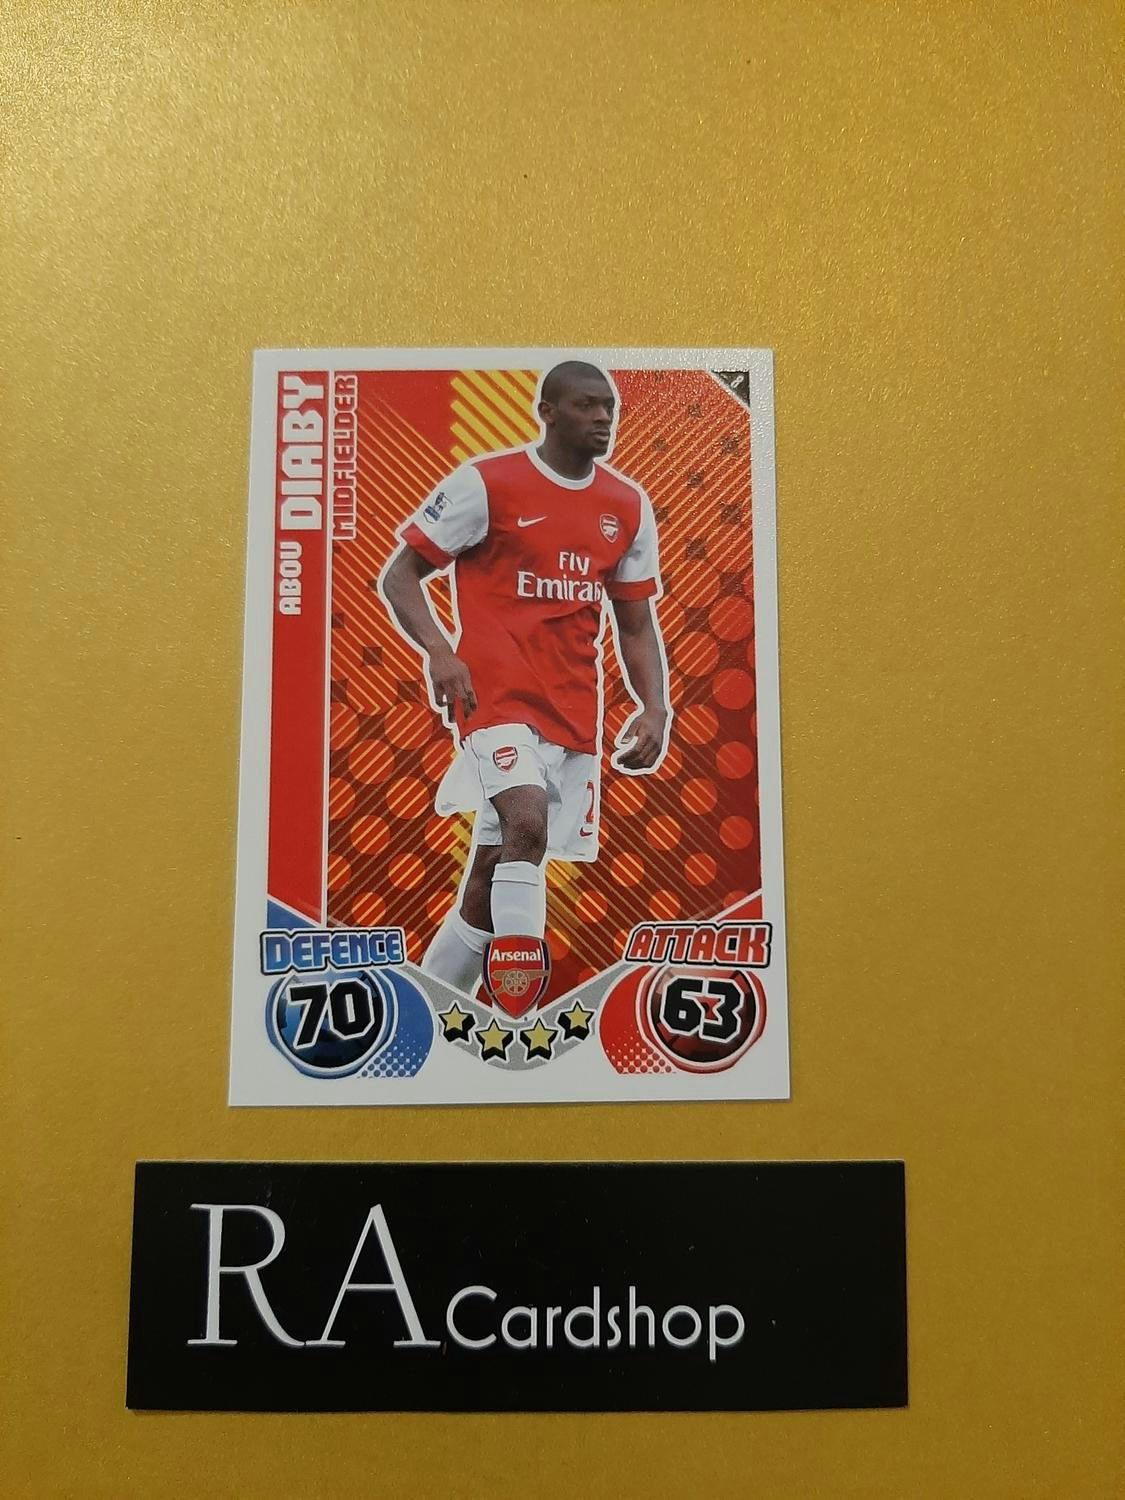 Abou Daiby #8 2010-11 Topps Match Attax